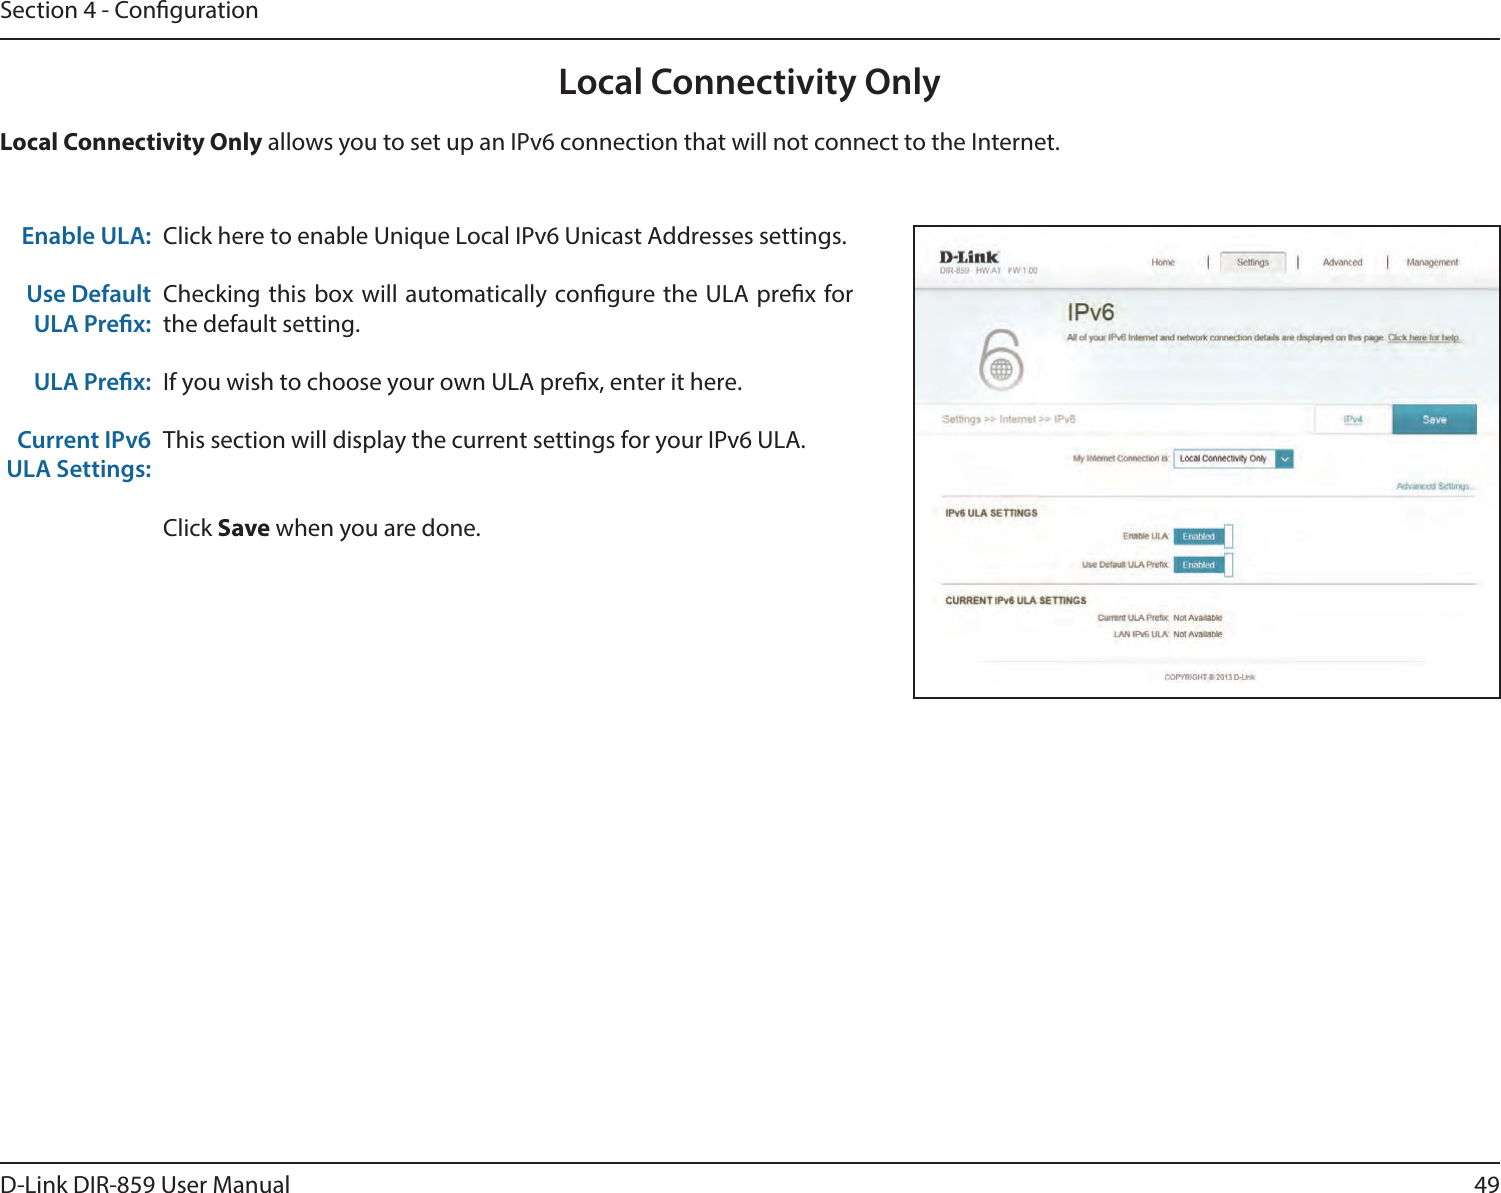 49D-Link DIR-859 User ManualSection 4 - CongurationLocal Connectivity OnlyClick here to enable Unique Local IPv6 Unicast Addresses settings.Checking this box will automatically congure the ULA prex for the default setting.If you wish to choose your own ULA prex, enter it here.This section will display the current settings for your IPv6 ULA.Click Save when you are done.Enable ULA:Use Default ULA Prex:ULA Prex:Current IPv6 ULA Settings:Local Connectivity Only allows you to set up an IPv6 connection that will not connect to the Internet.